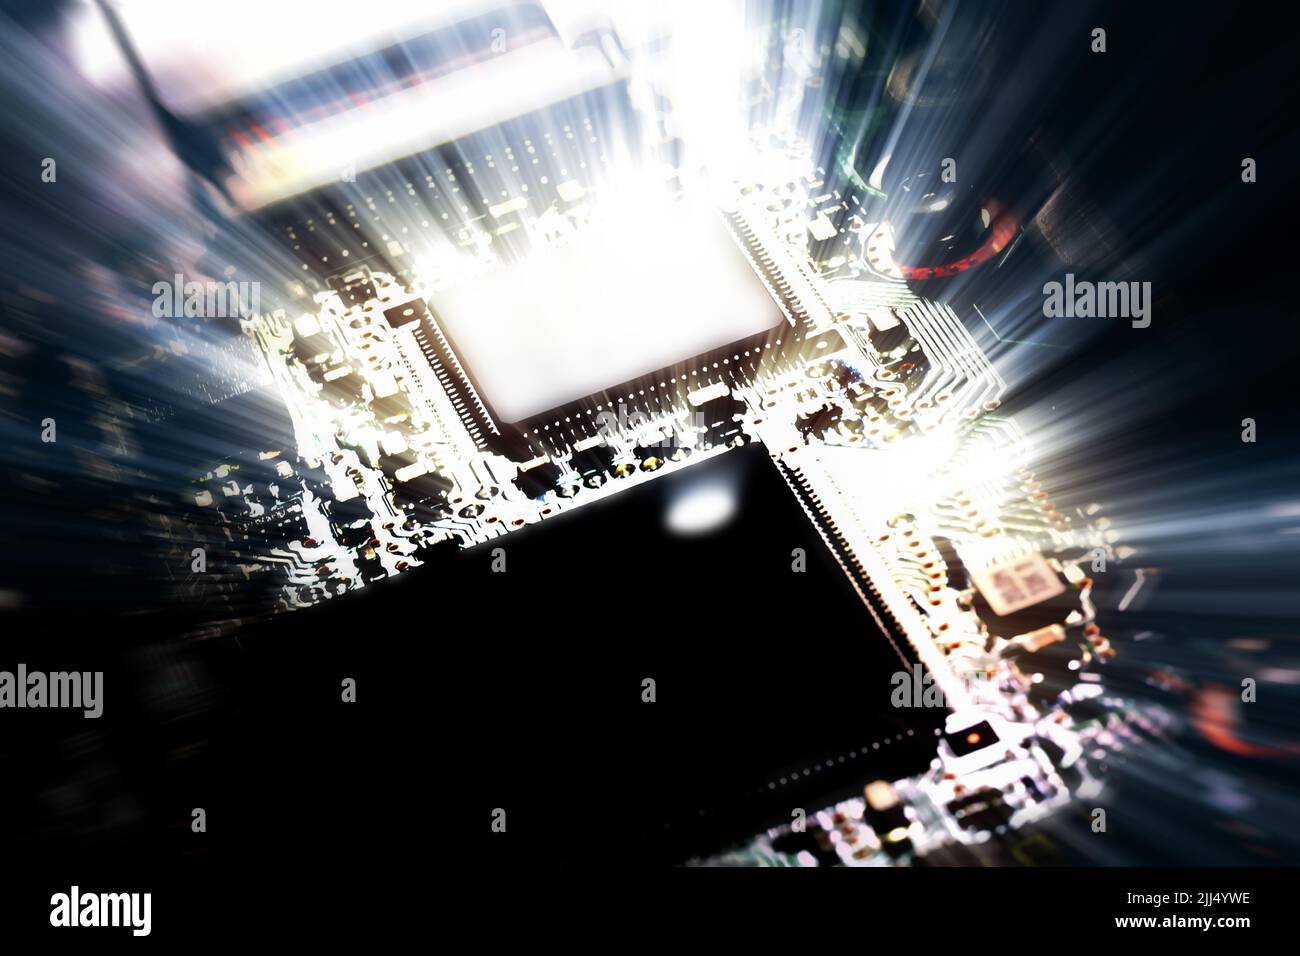 The 4th industry leading science and economy Advanced digital semiconductor technology and bright light and rays of electronic circuits Stock Photo